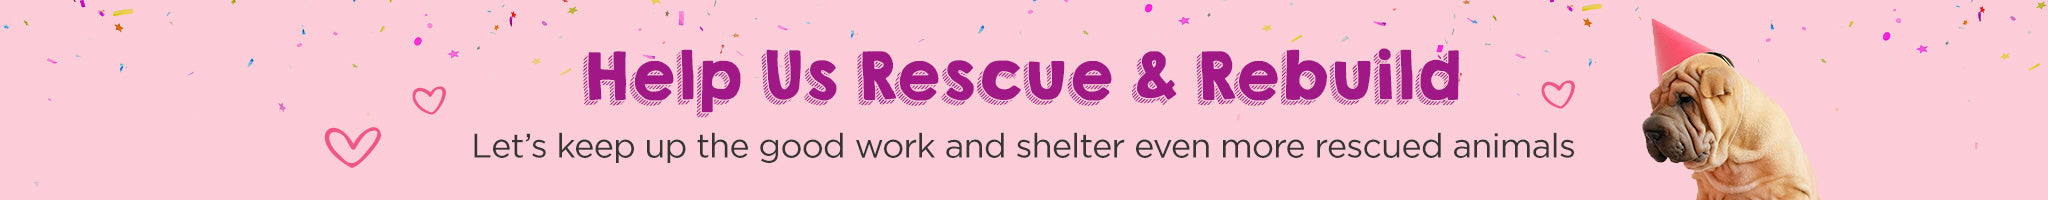 Help Us Rescue & Rebuild | Let's keep up the good work and shelter even more rescued animals